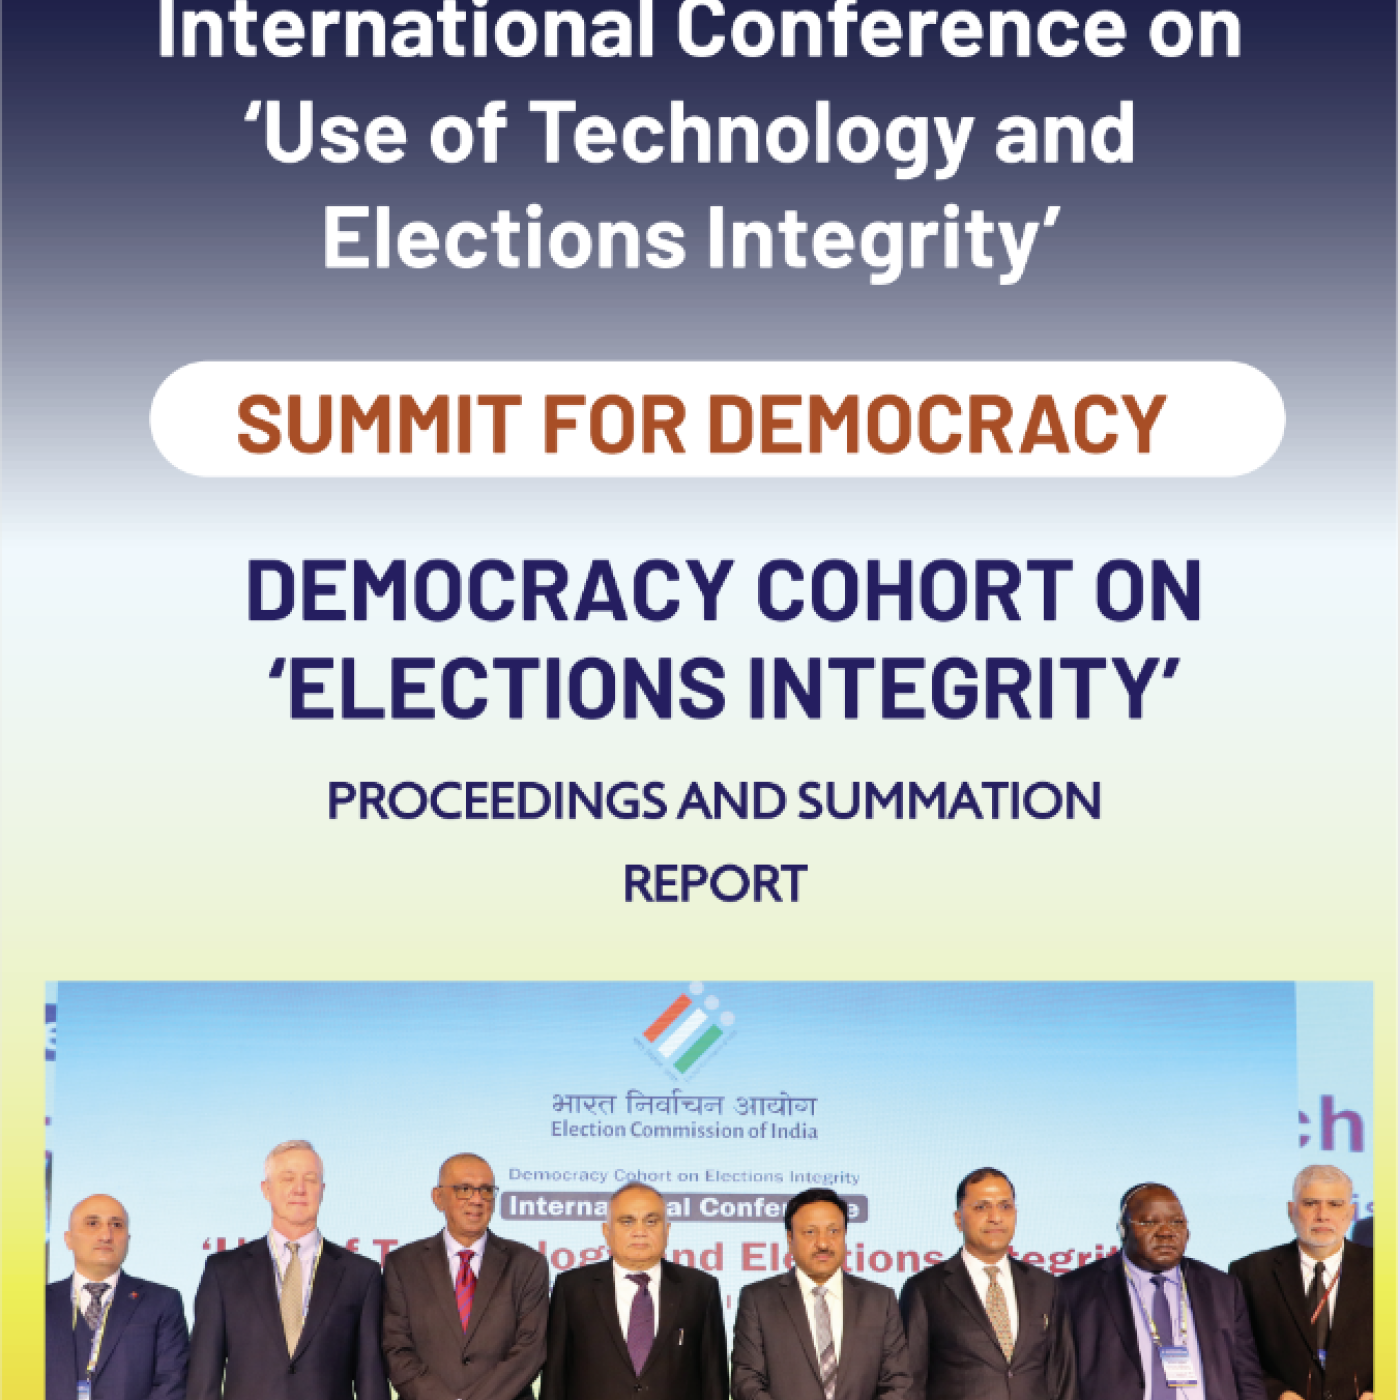 Technology and Elections Conference Summation Report